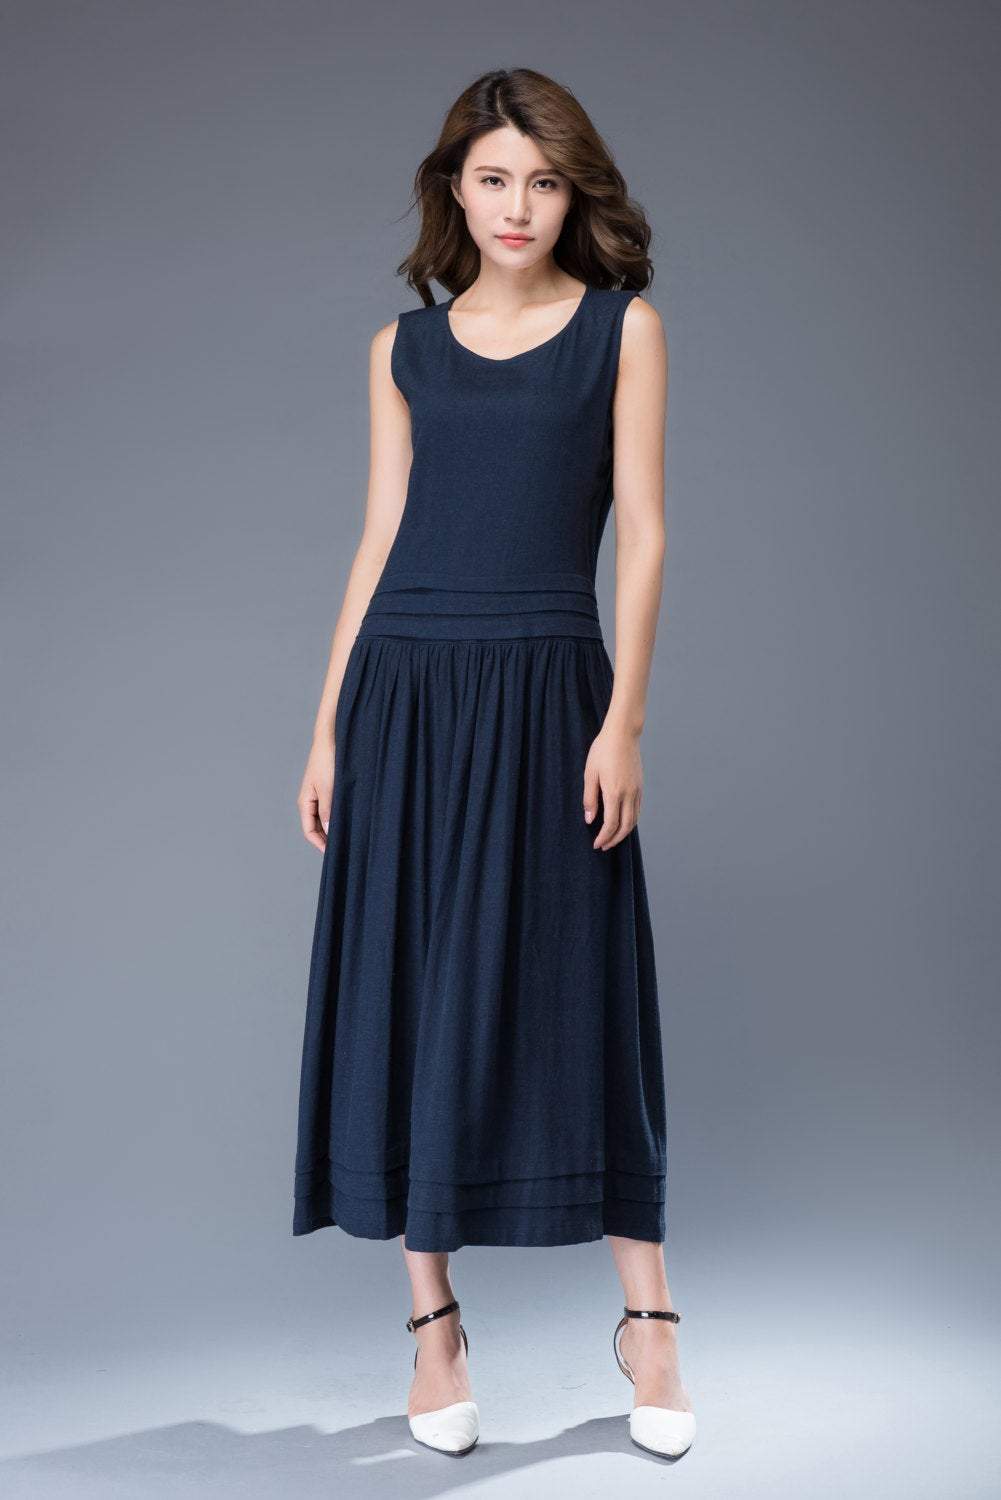 Linen Maxi Dress – Plain Classic Navy Blue Long Sleeveless Fitted Fit & Flare with Bow Tie at the Back and Pockets C938